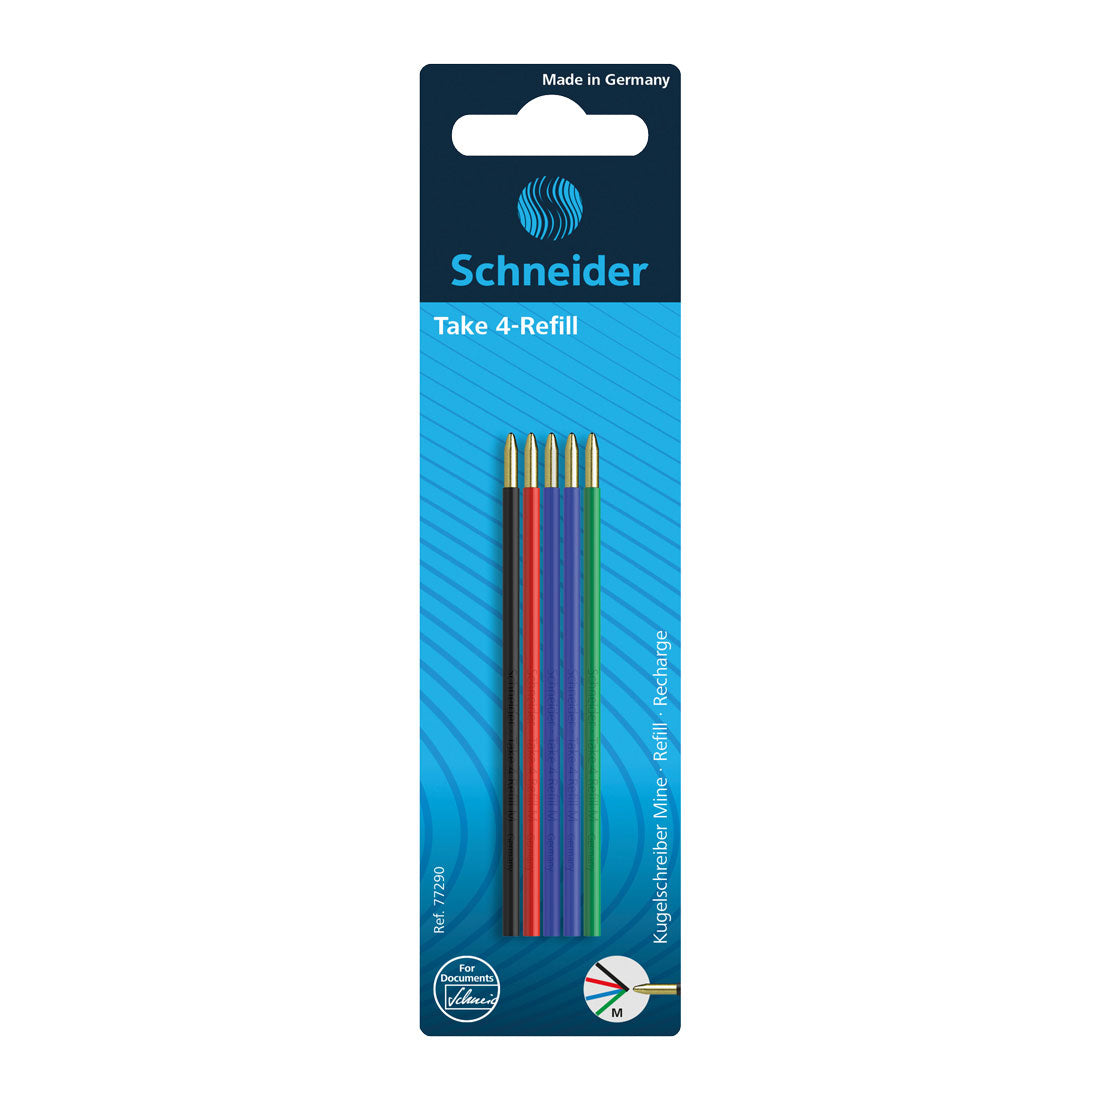 Take 4 Refill for 4-Color Ballpoint Pen M - Assorted (5) Media 1 of 3